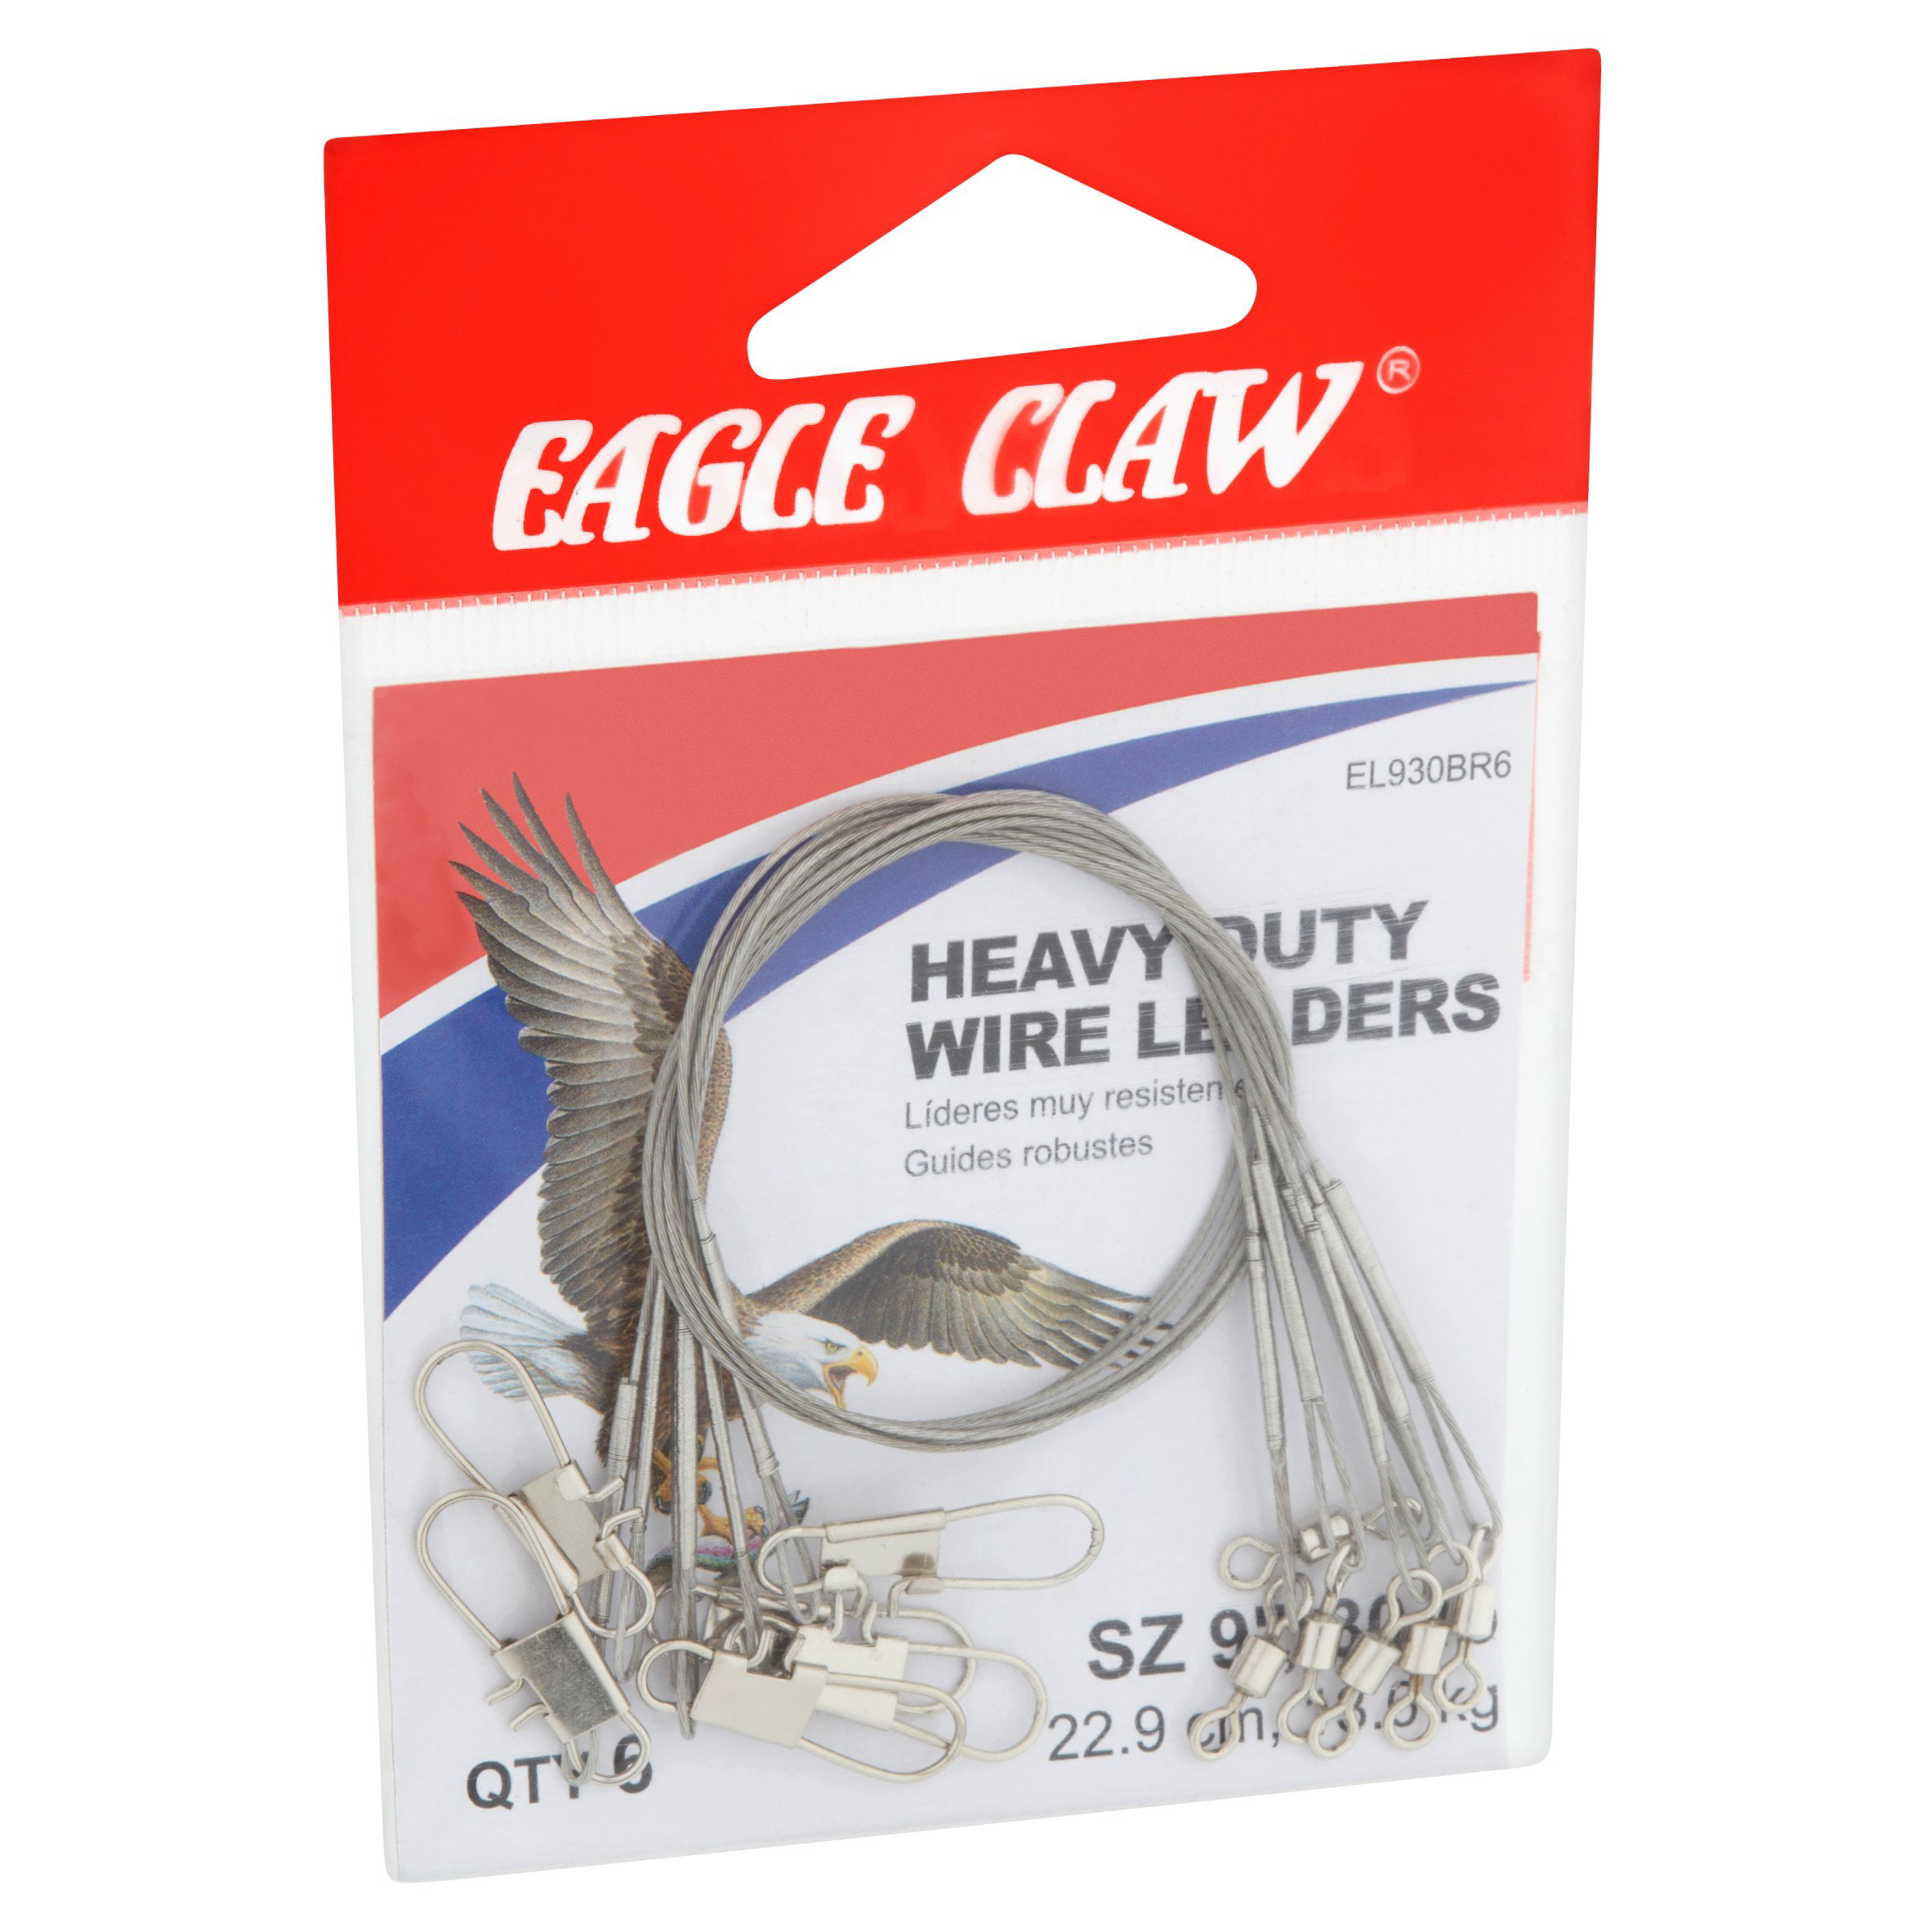 Eagle Claw 9 30 lb. Heavy Duty Wire Leader, Bright, 6 Pack